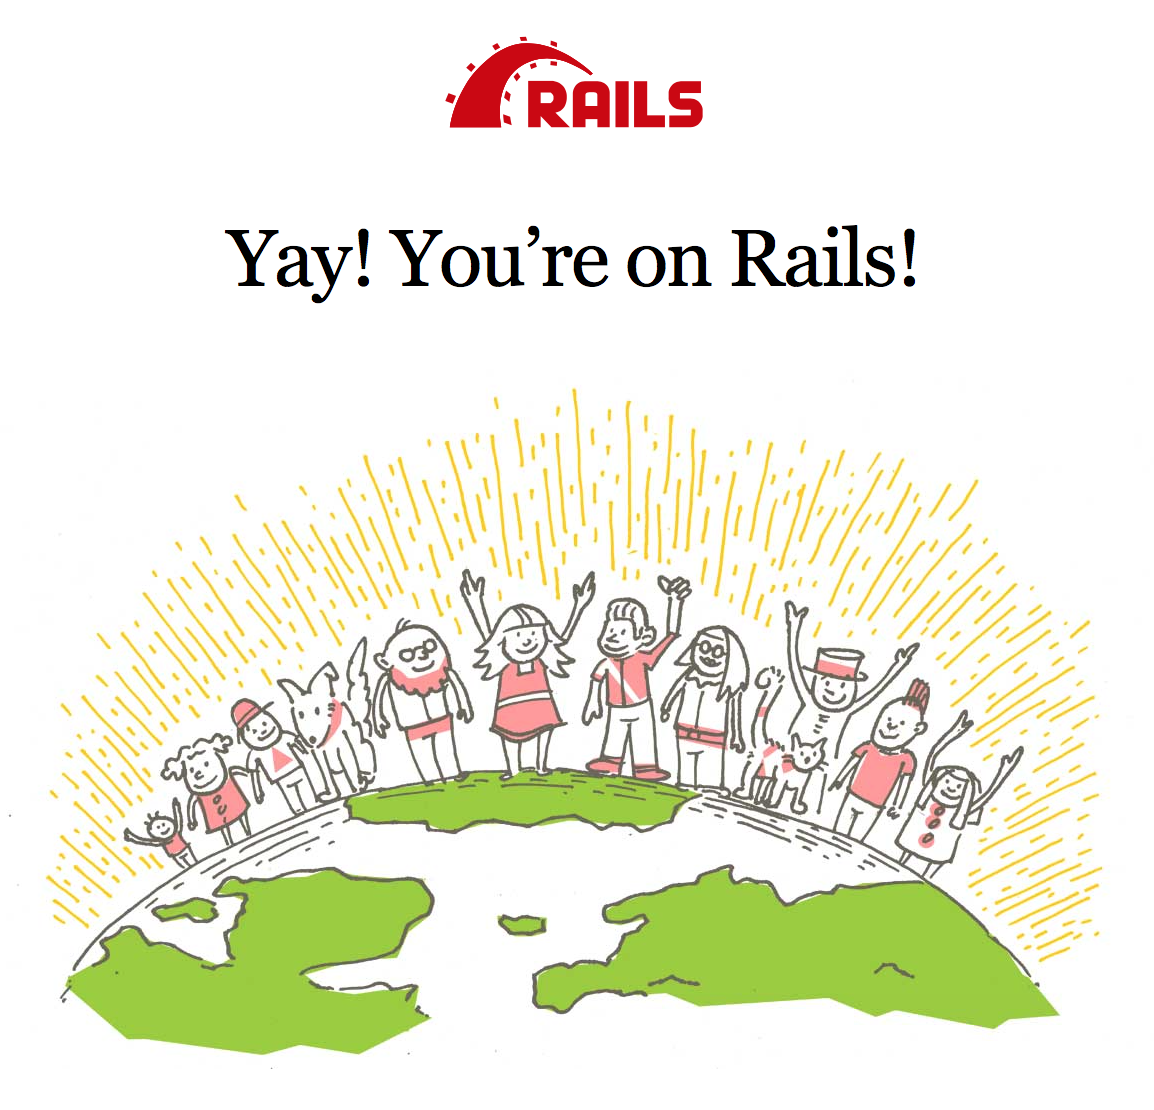 guides/assets/images/getting_started/rails_welcome.png